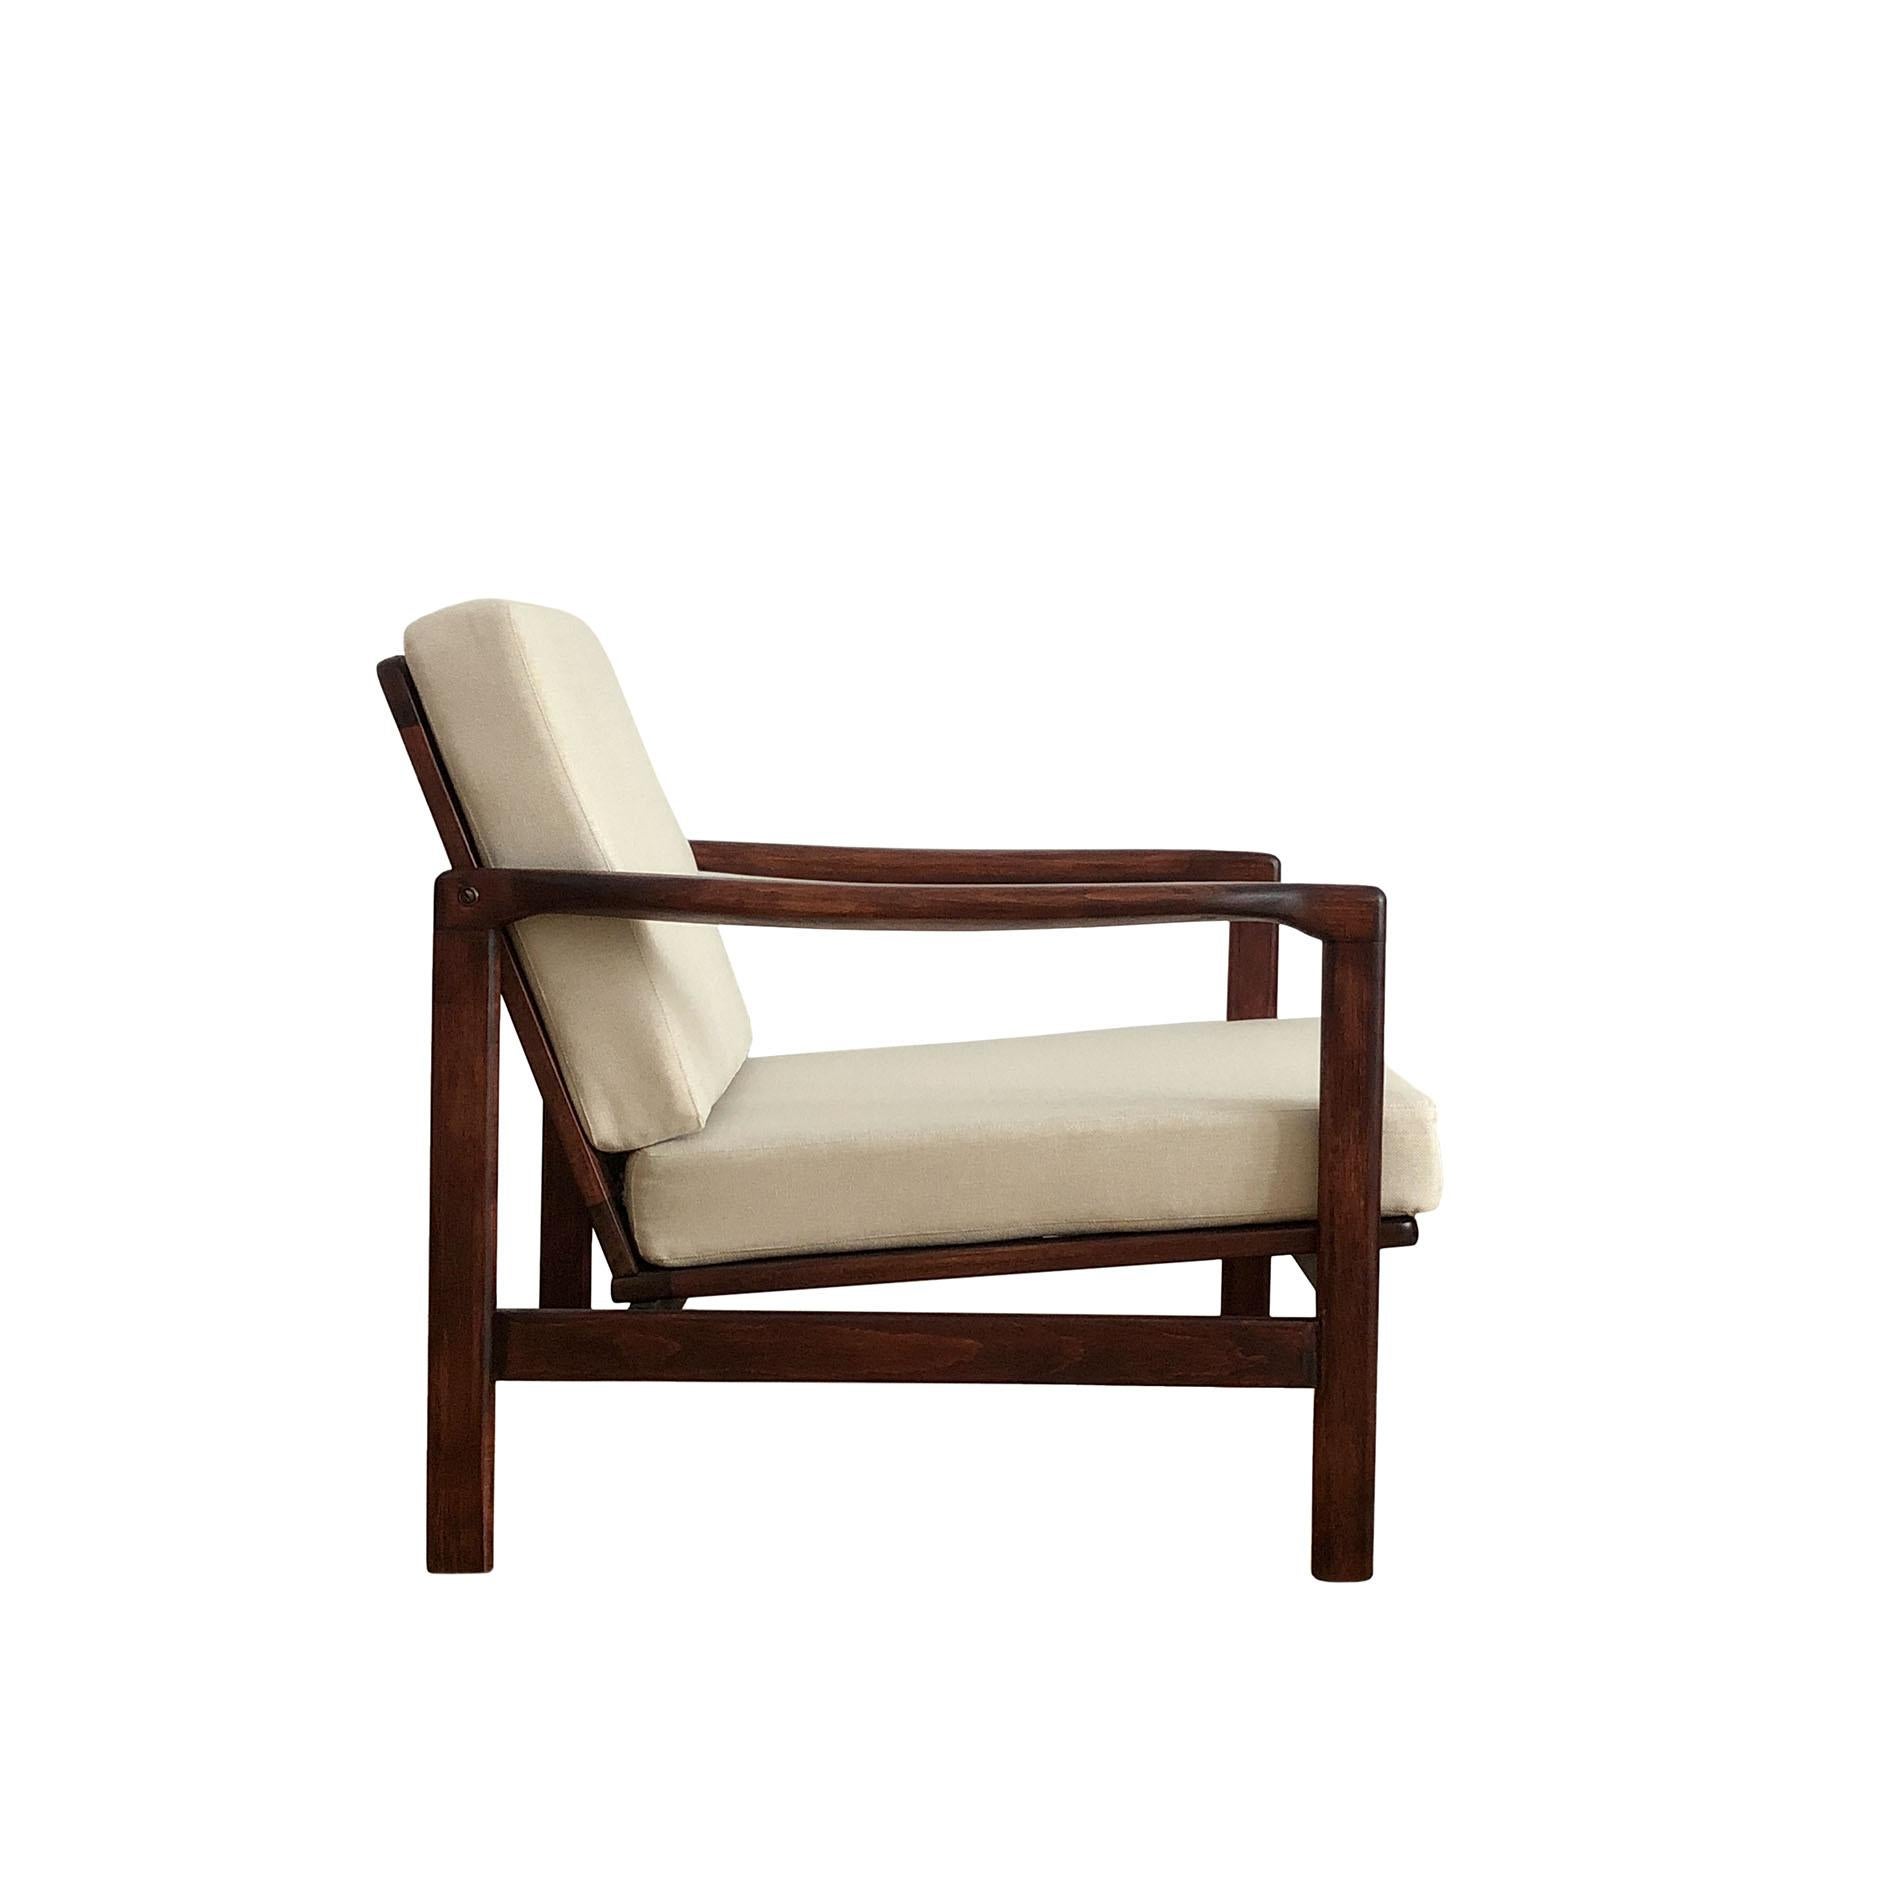 The armchair model B-7752, designed by Zenon Baczyk, has been manufactured by Swarzedzkie Fabryki Mebli in Poland in the 1960s. The structure is made of beech wood in palisander color, finished with a semi matte varnish. The upholstery is high